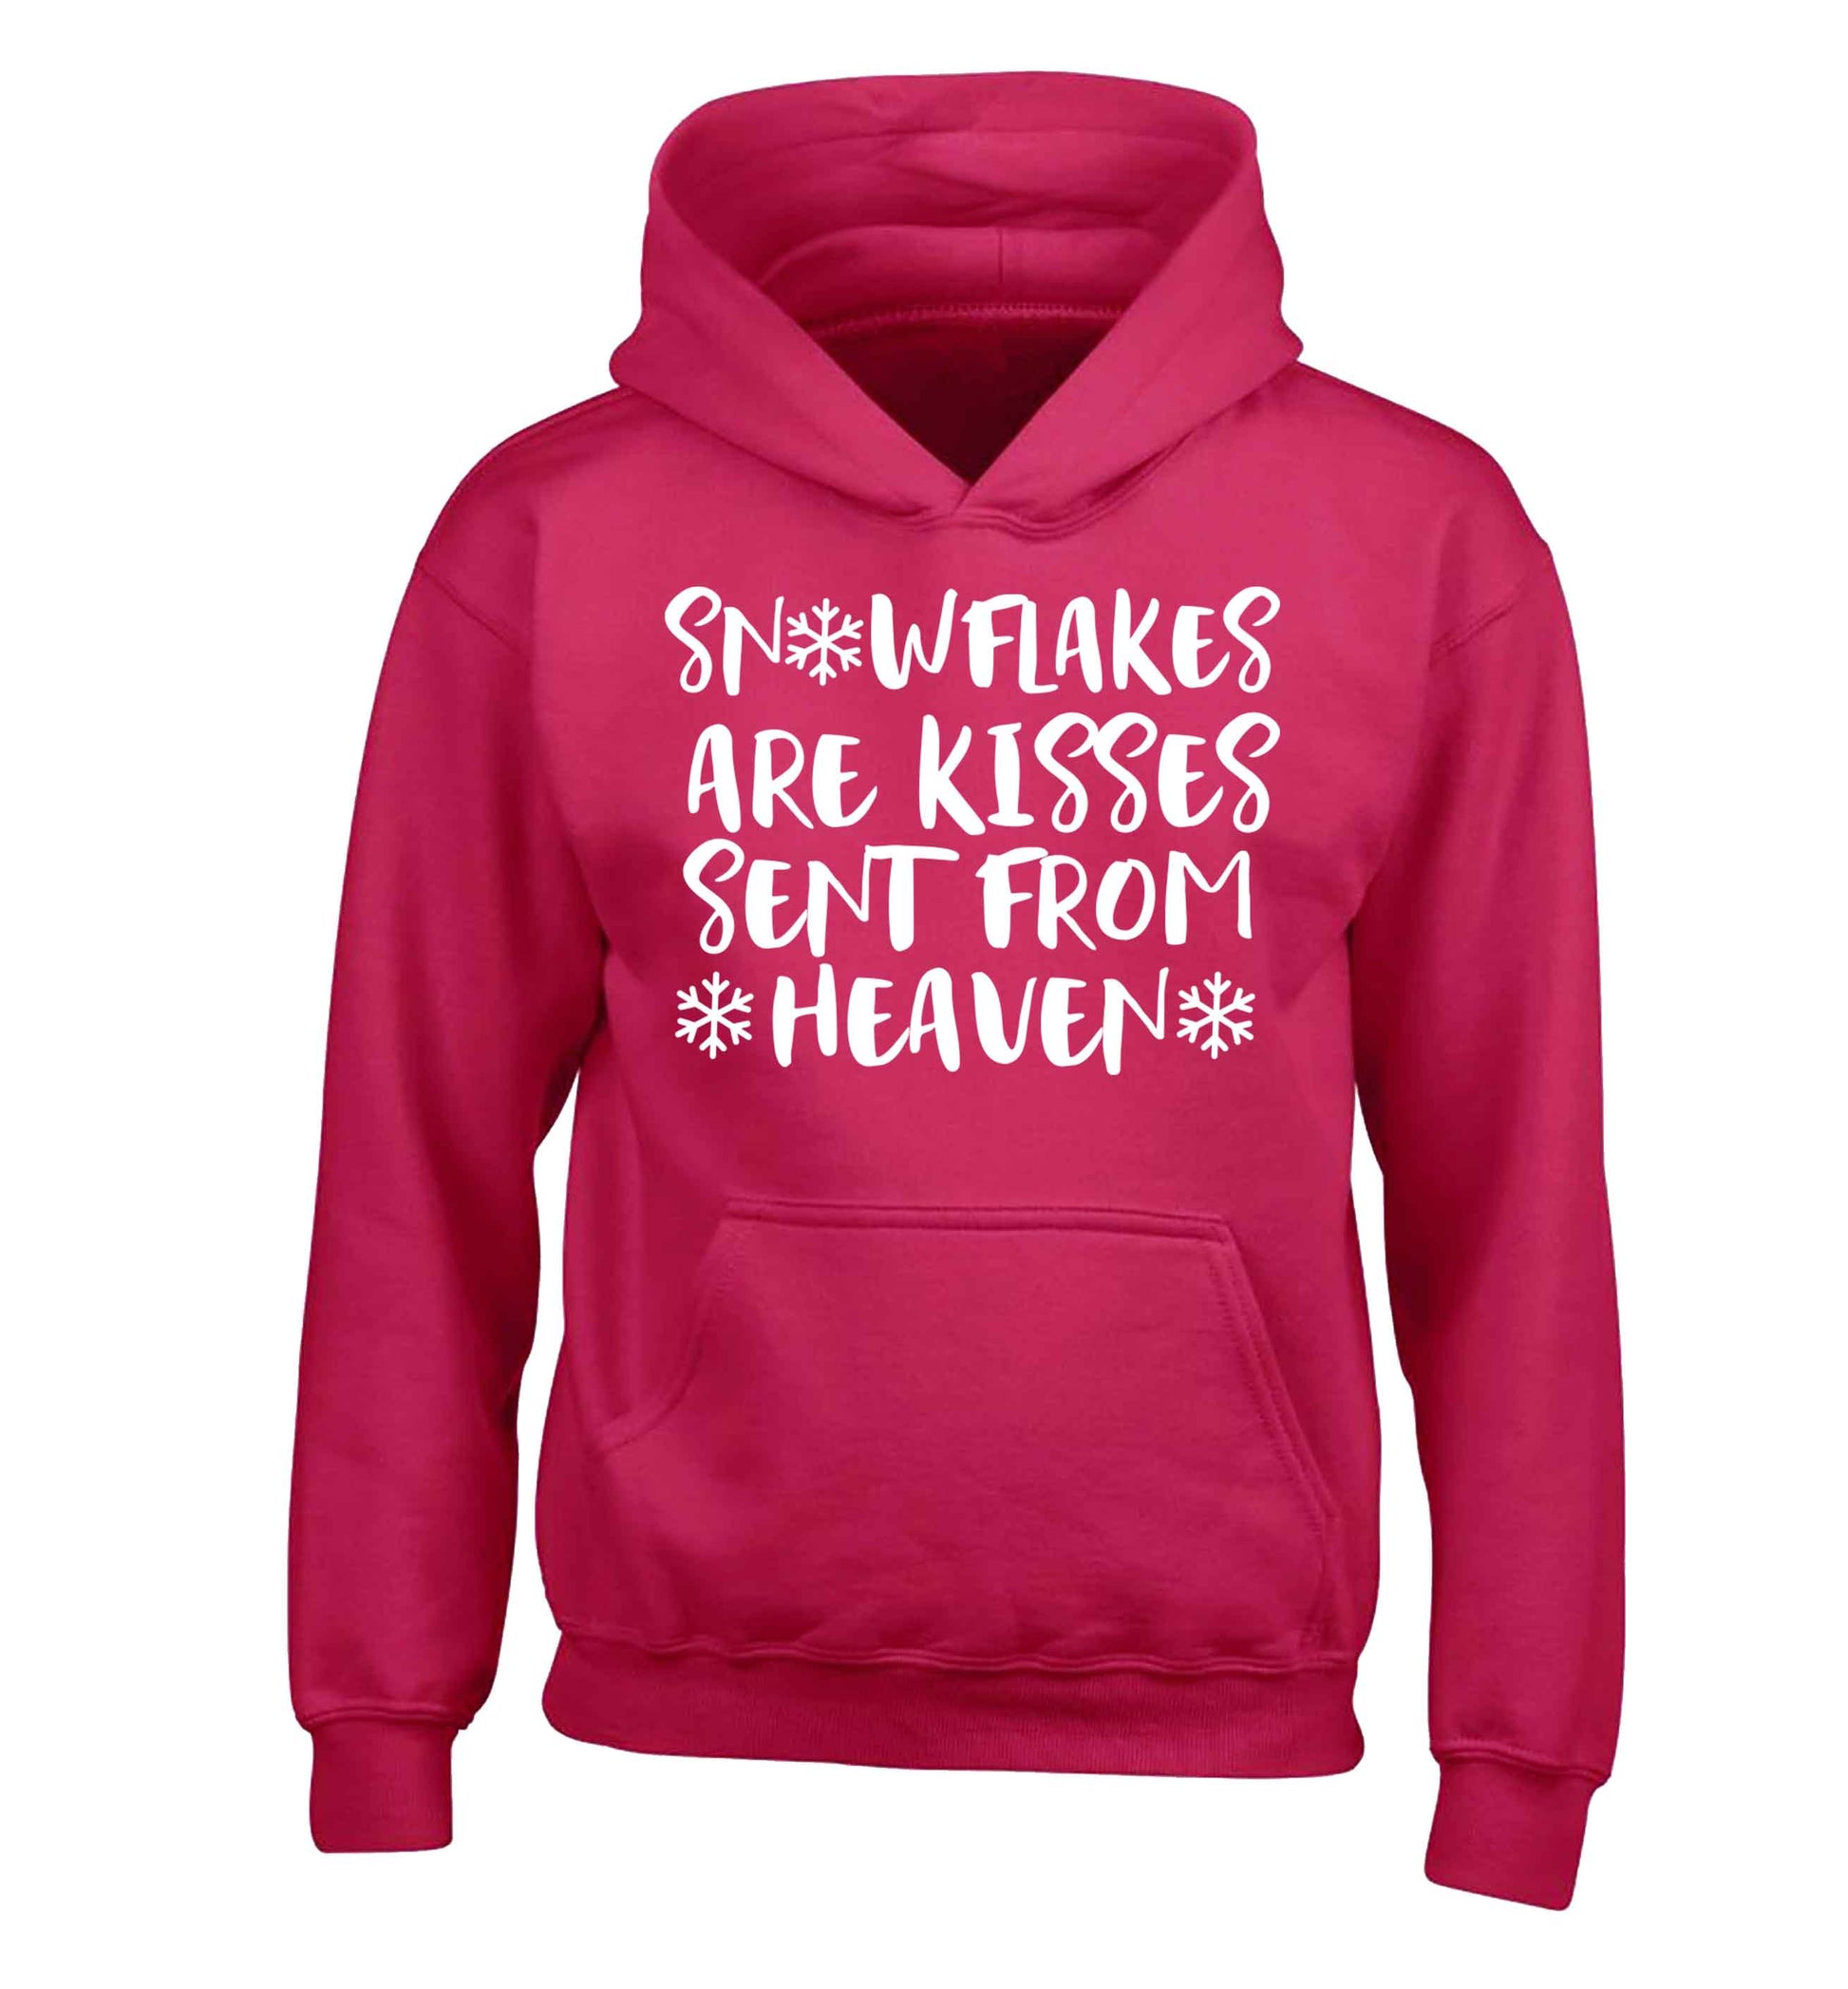 Snowflakes are kisses sent from heaven children's pink hoodie 12-13 Years